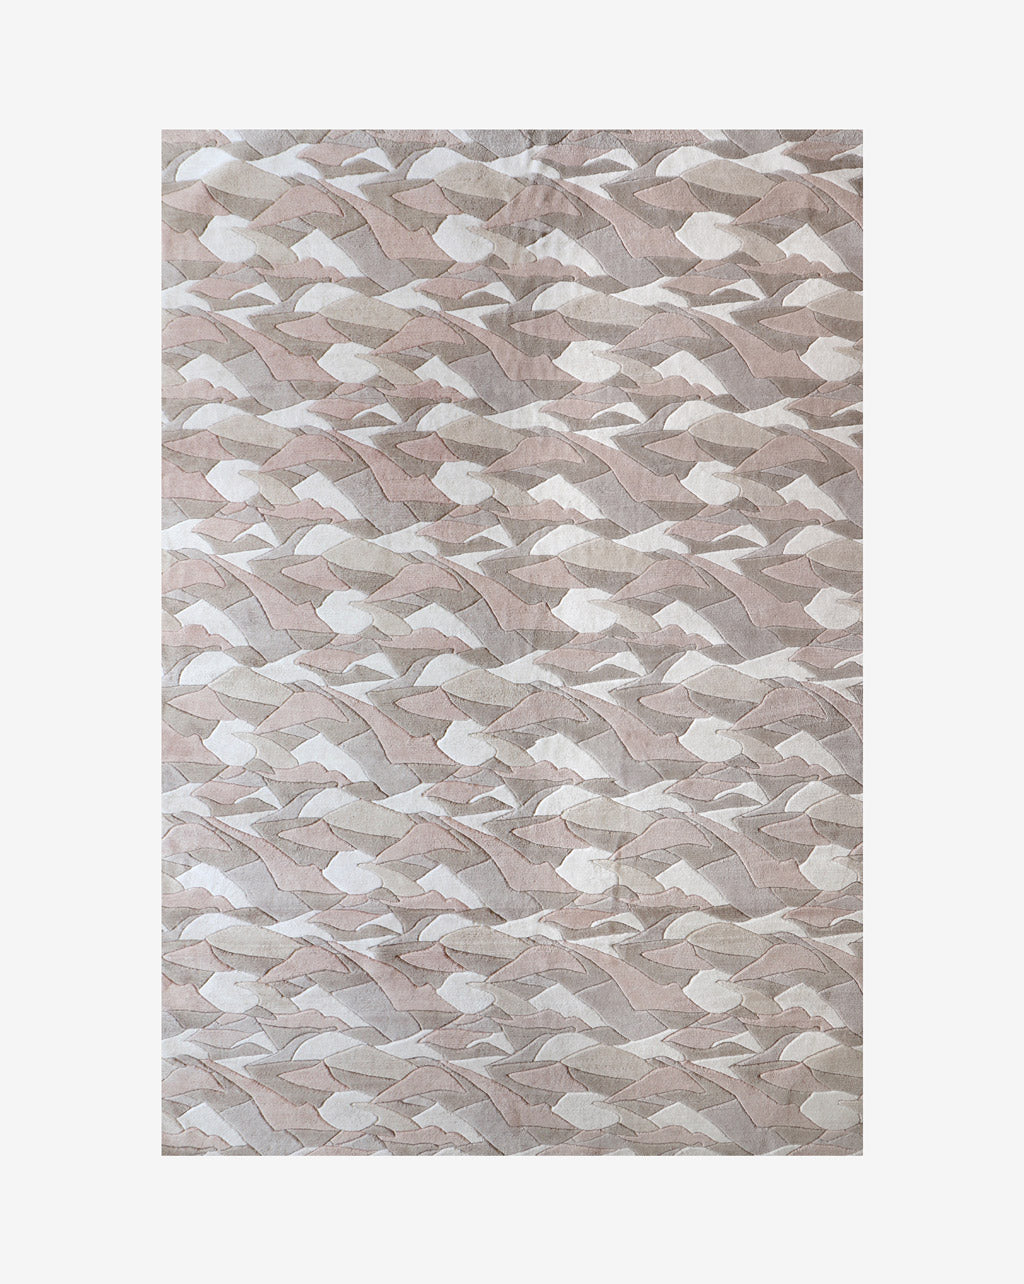 A Mani Hand Knotted Rug 5' x 8'||Air with a beige and white pattern made of merino wool.